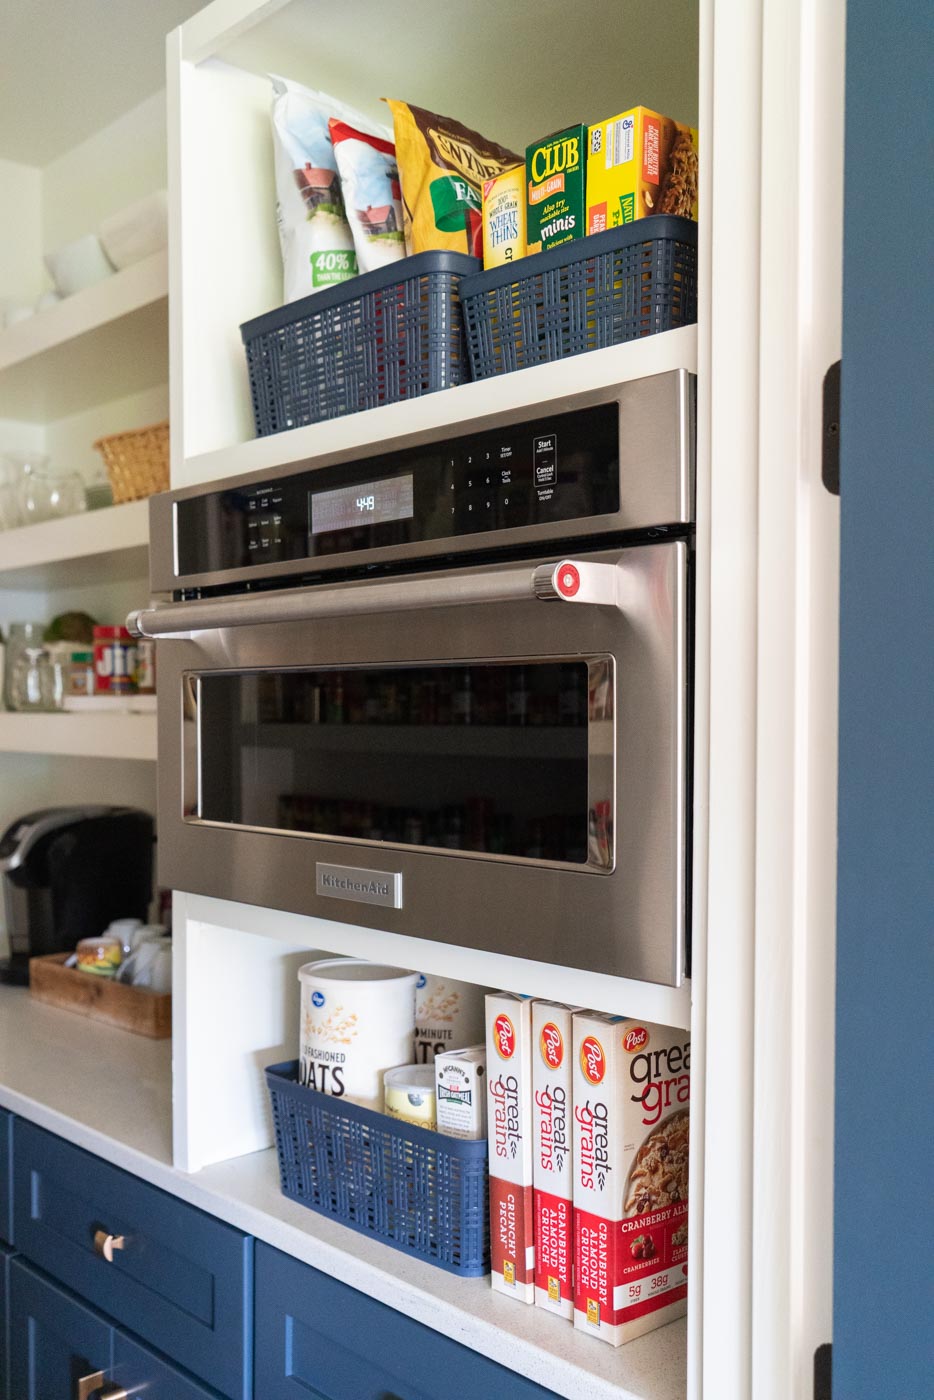 A KitchenAid microwave in a pantry with organized shelves